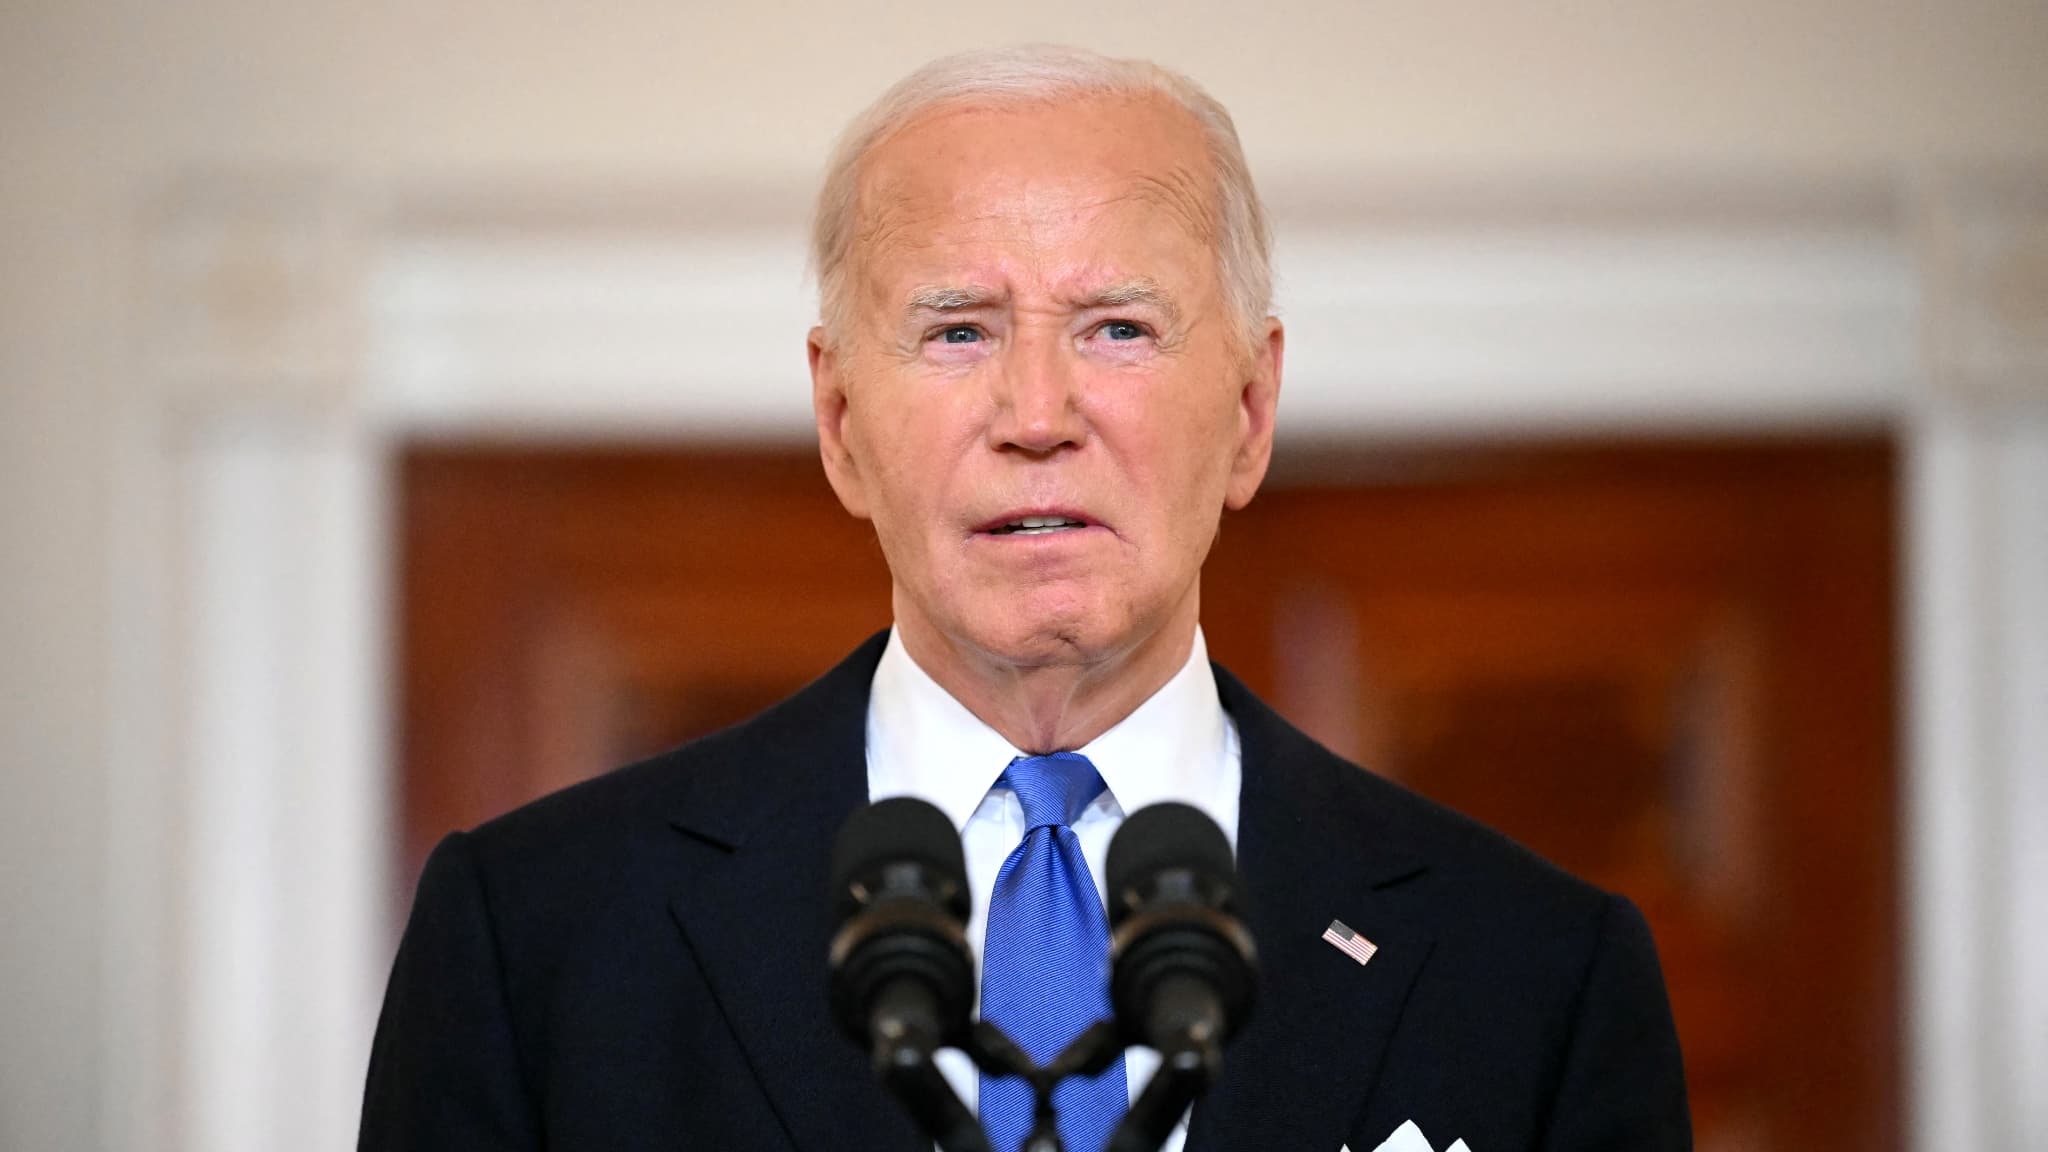 Joe Biden accidentally reads instructions given to him